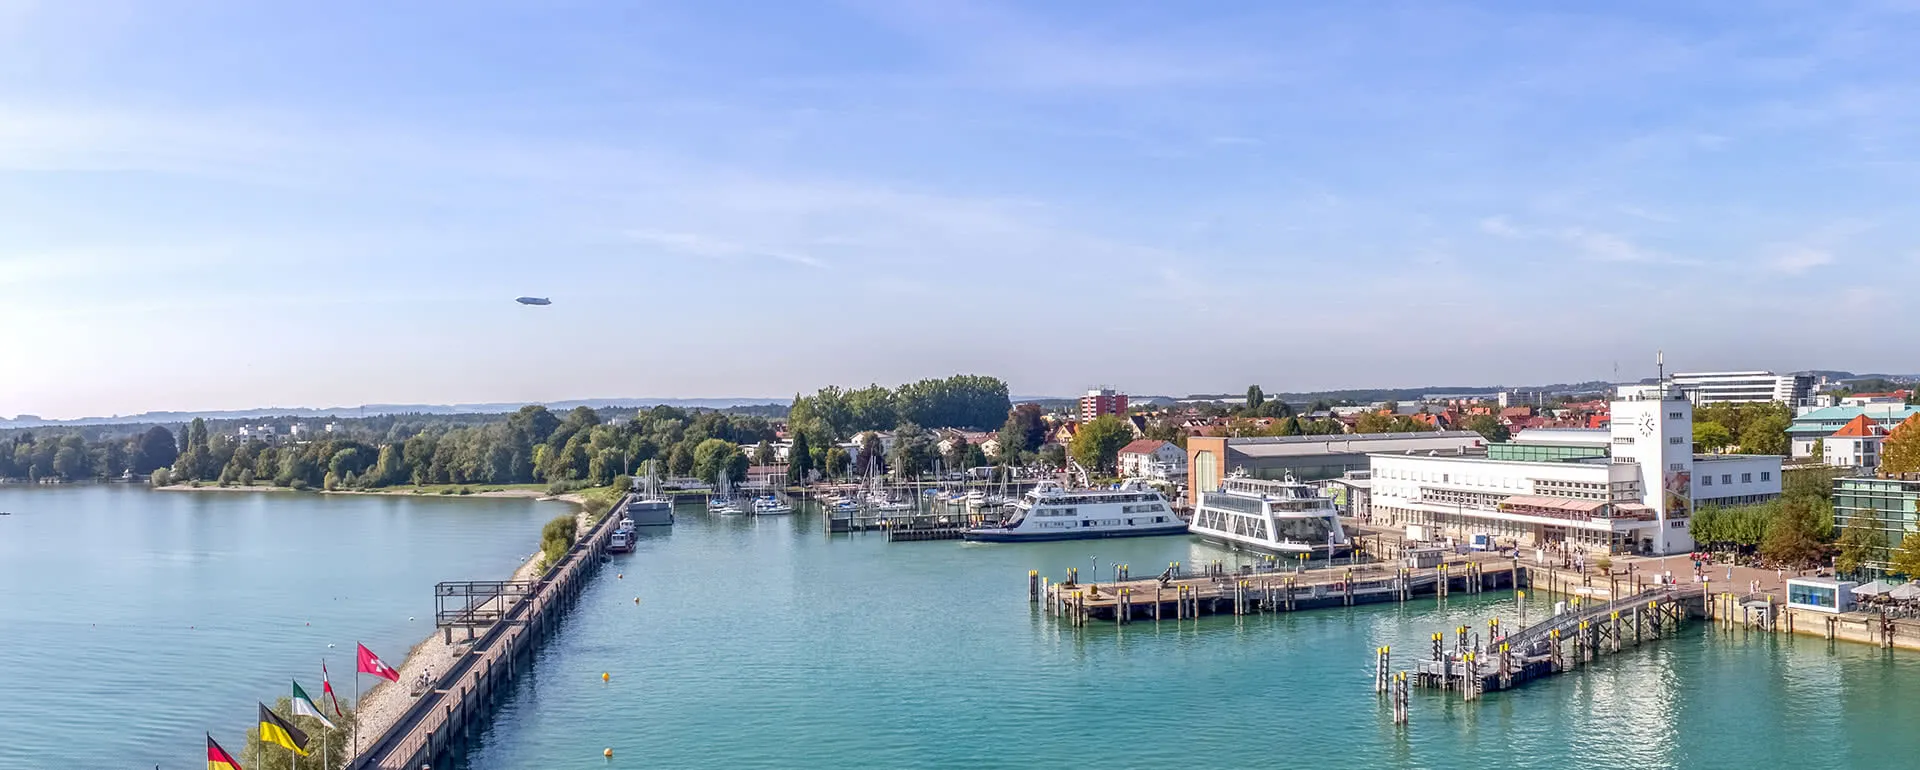 Meeting and conference location Friedrichshafen